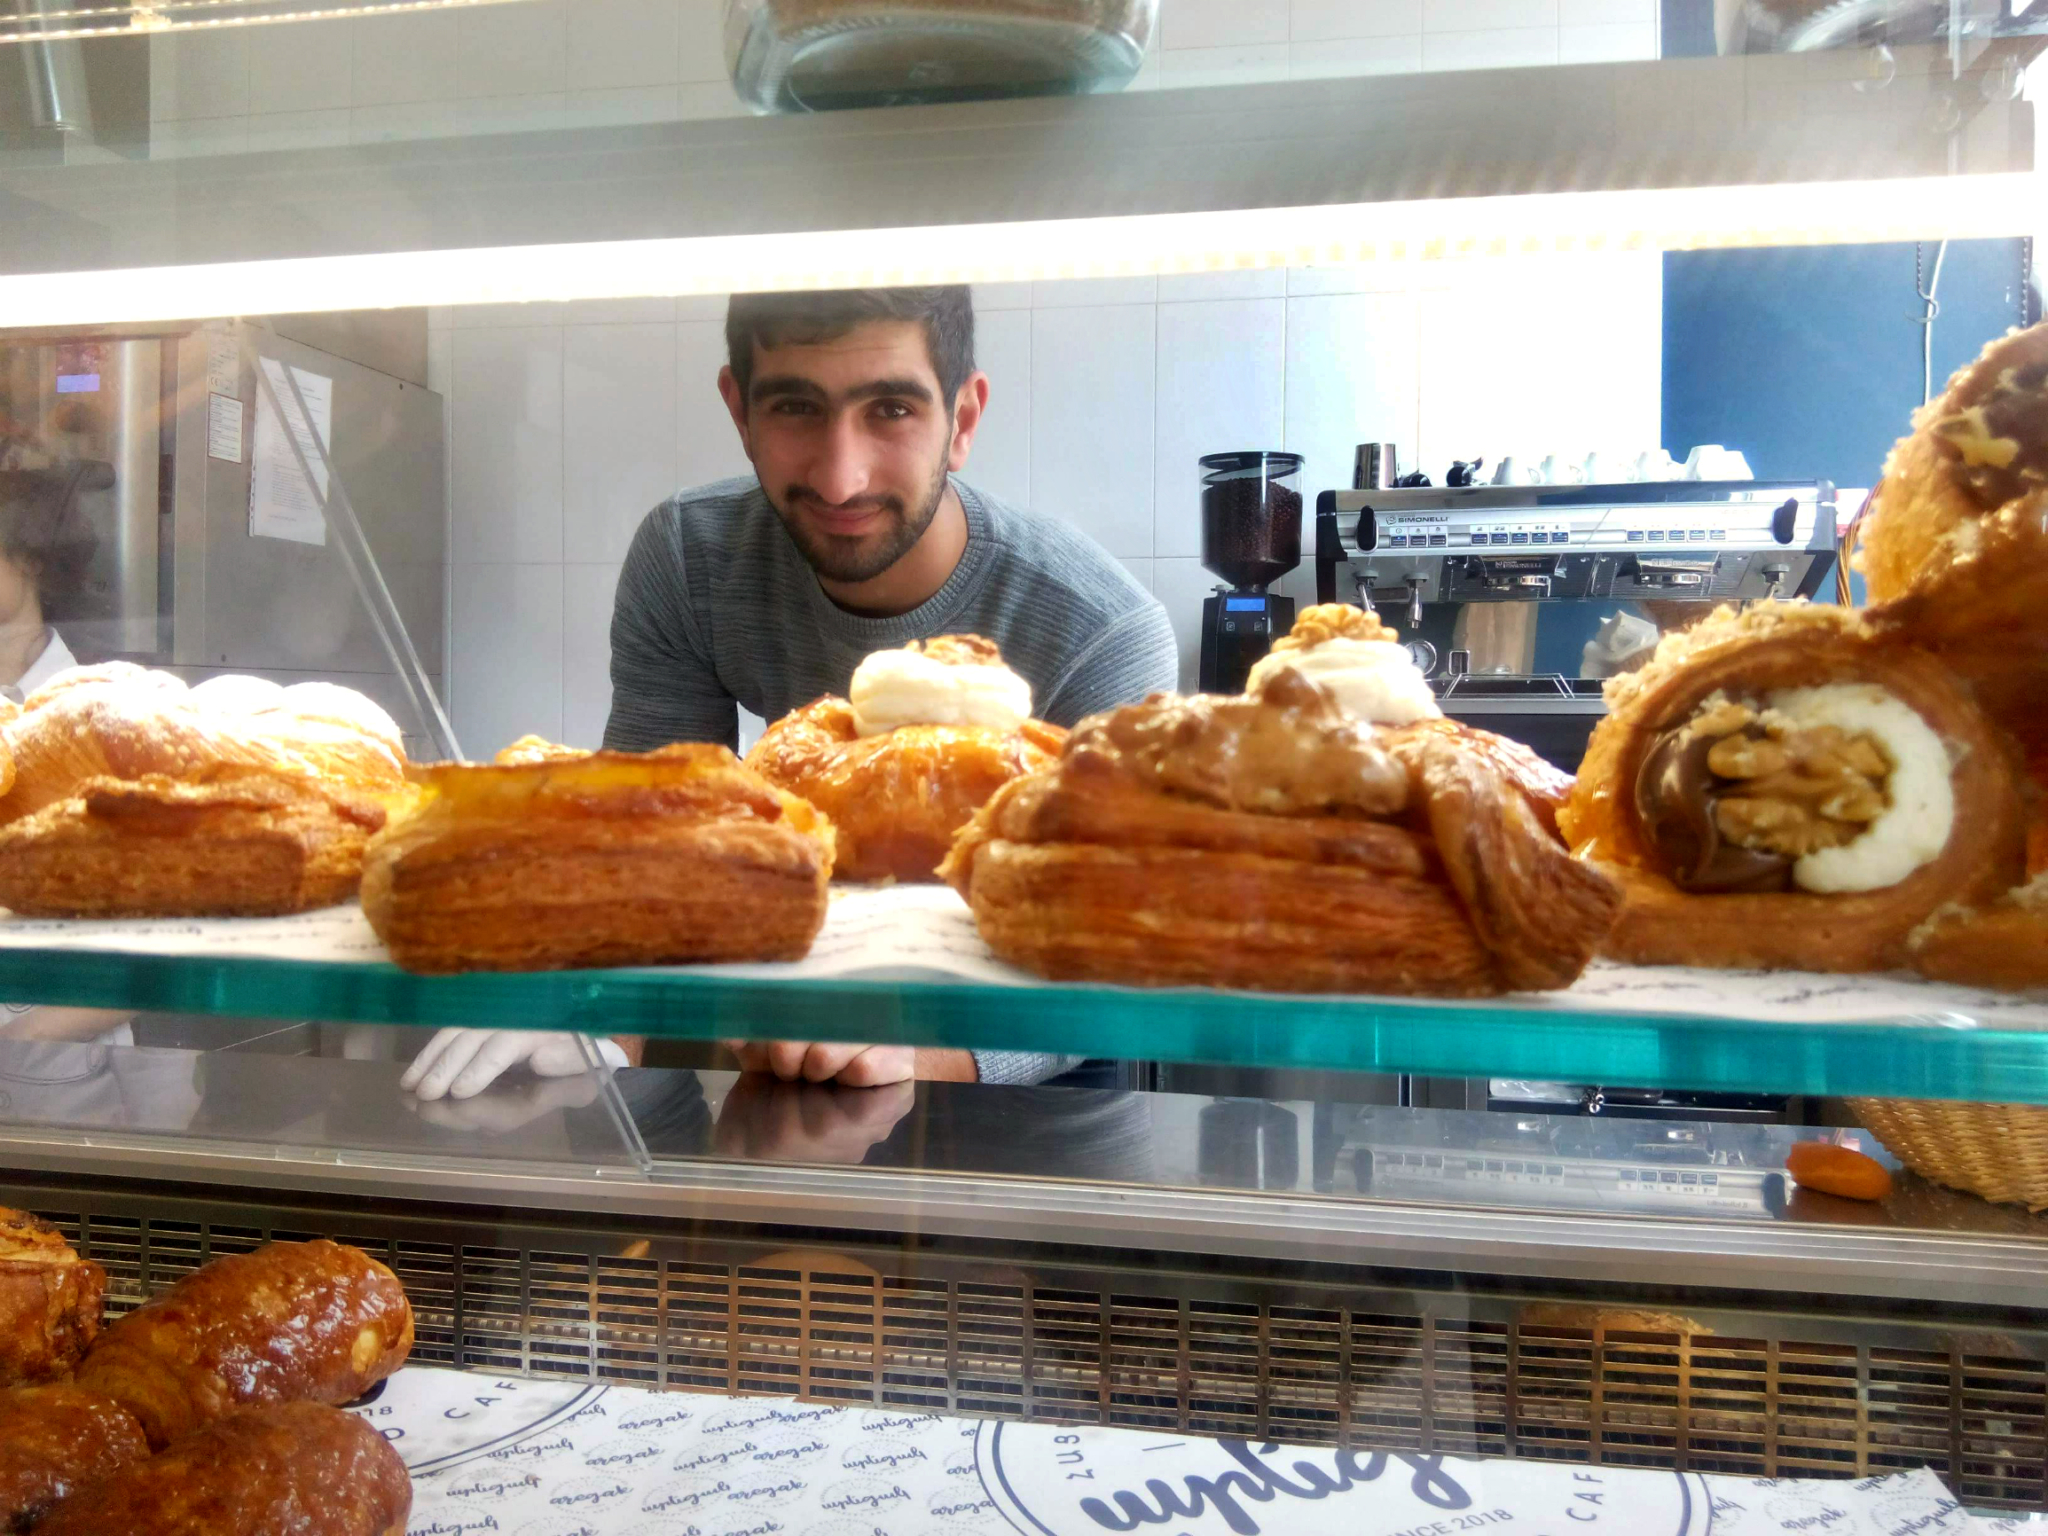 Armenia, cafe employs people with a number of disabilities such as Down syndrome, autism